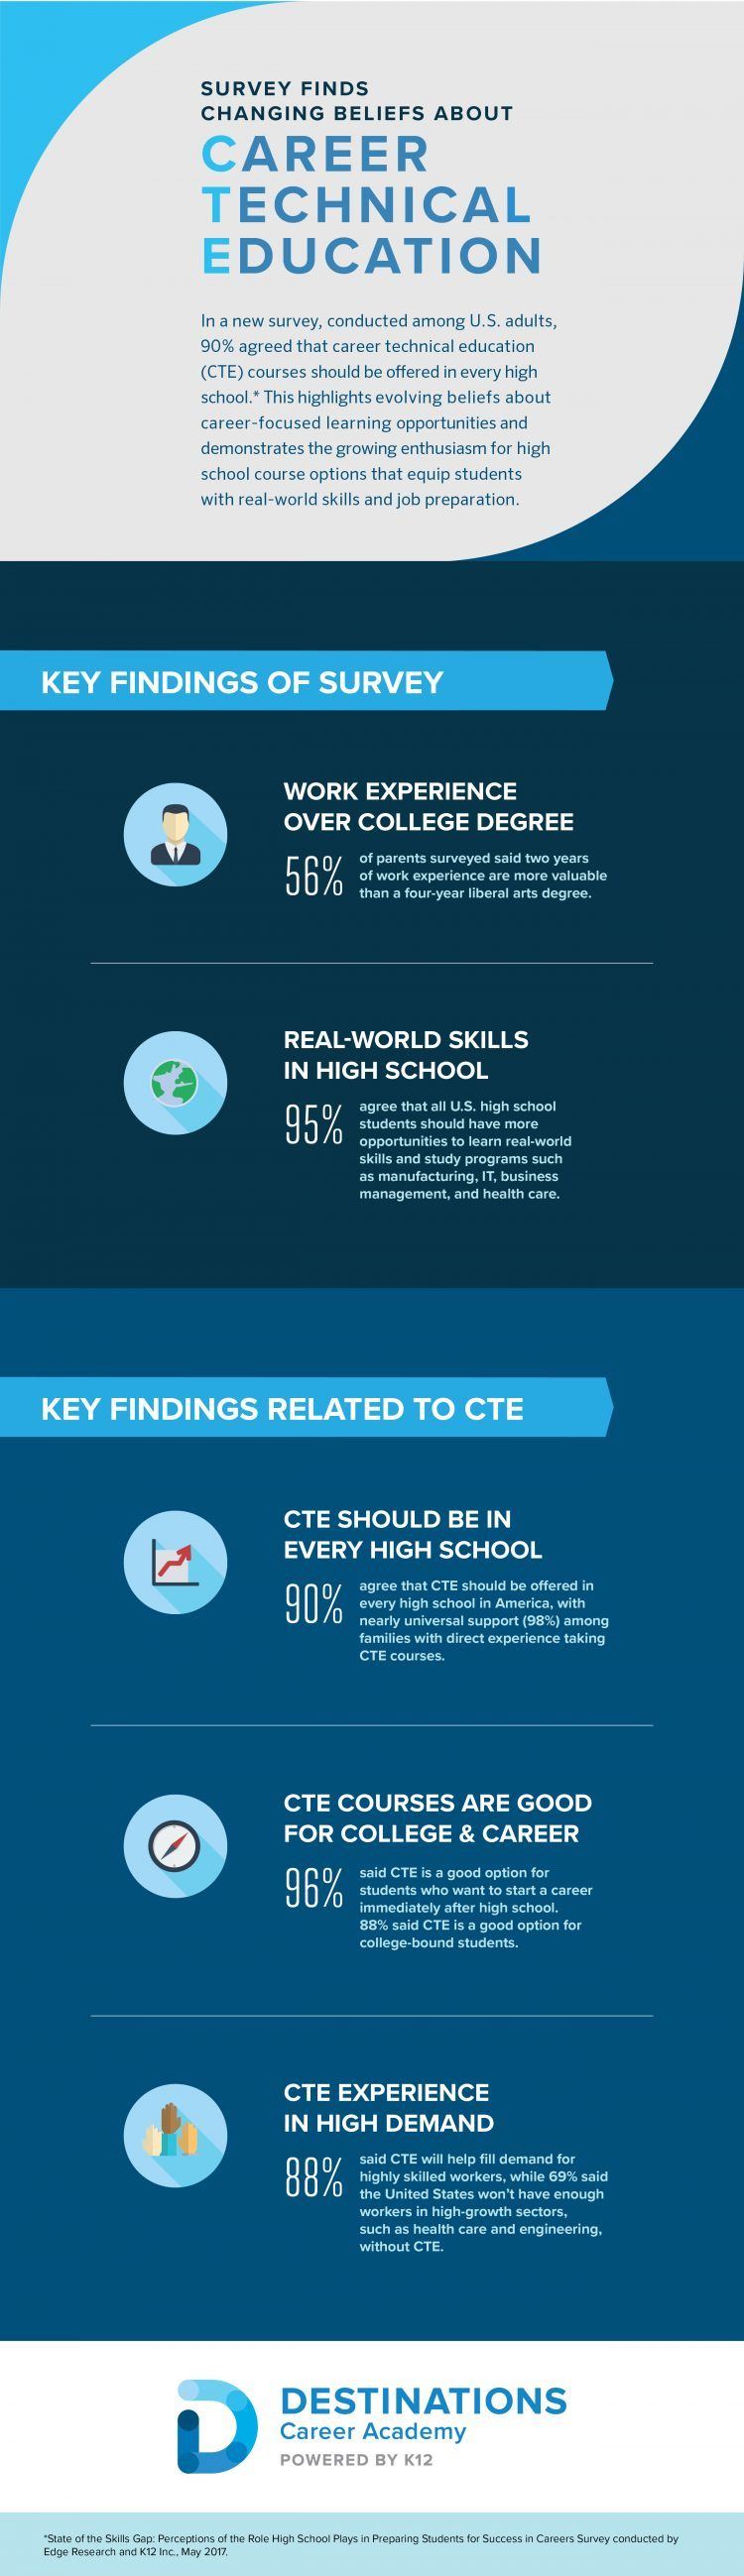 Should High Schools Offer Career Education? Infographic